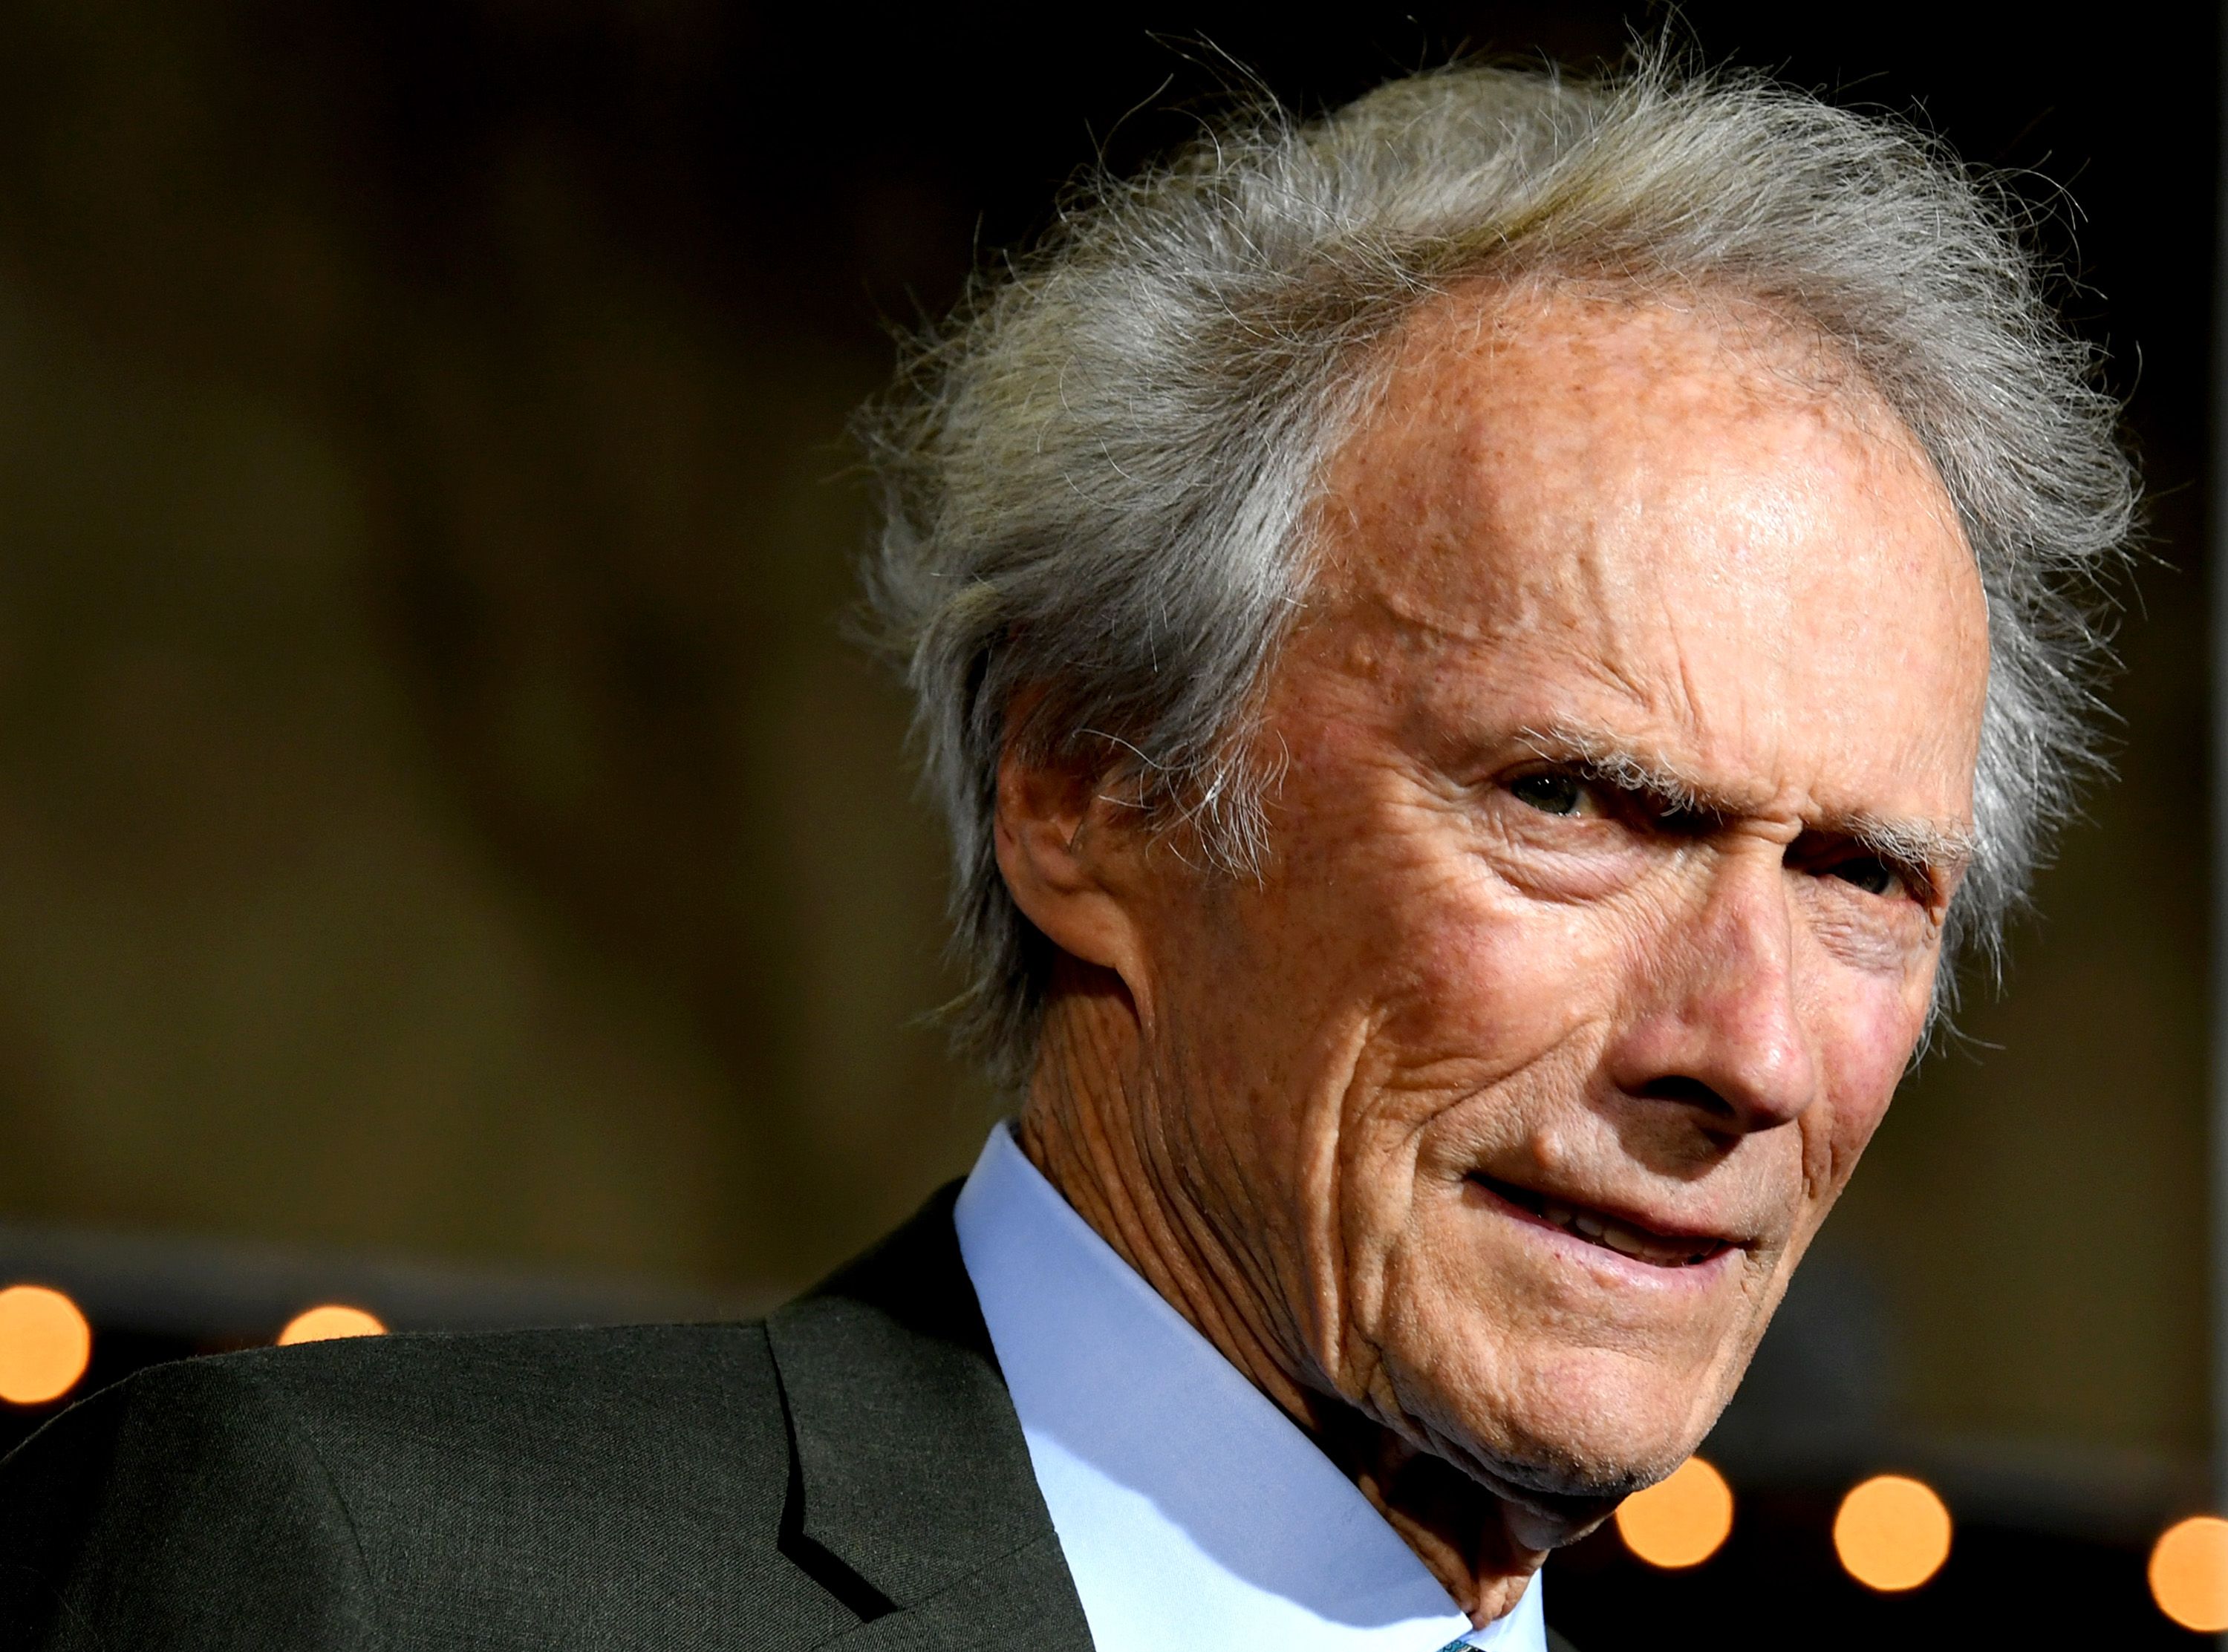 Clint Eastwood arrives at the premiere of Warner Bros. Pictures' "The Mule" at the Village Theatre on December 10, 2018. | Photo: Getty Images